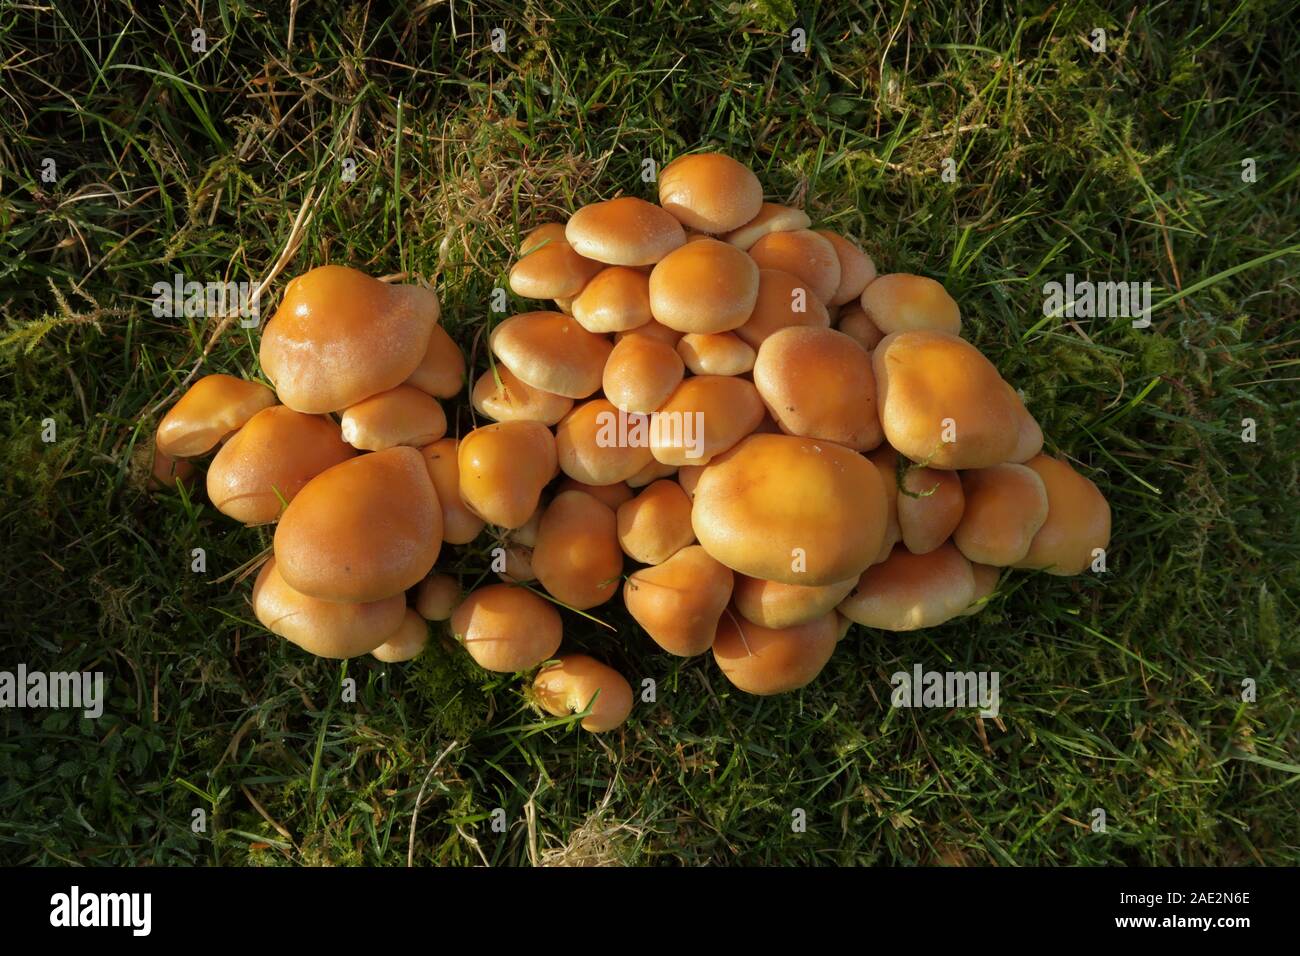 Two-toned wood-tuft fungus (Kuehneromyces mutabilis) growing on grass. Other common names are Brown Stew Fungus and Two-toned Pholiota. Widespread and Stock Photo